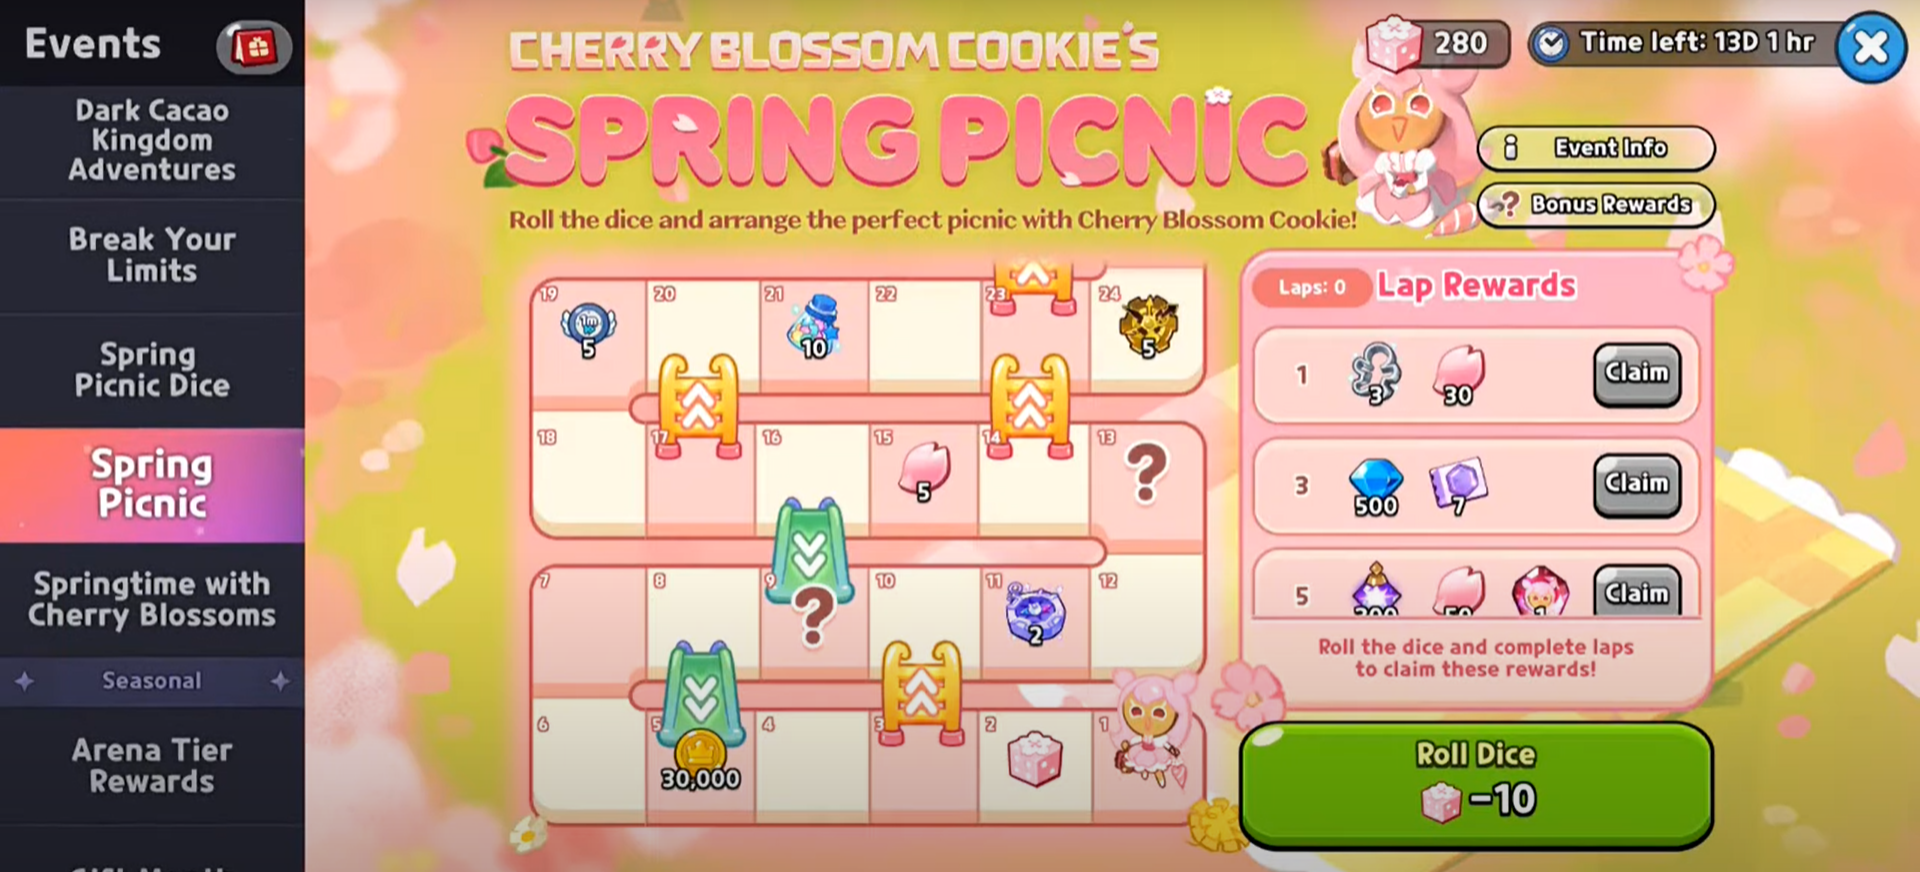 Cookie Run: Kingdom Spring Picnic Event Tips